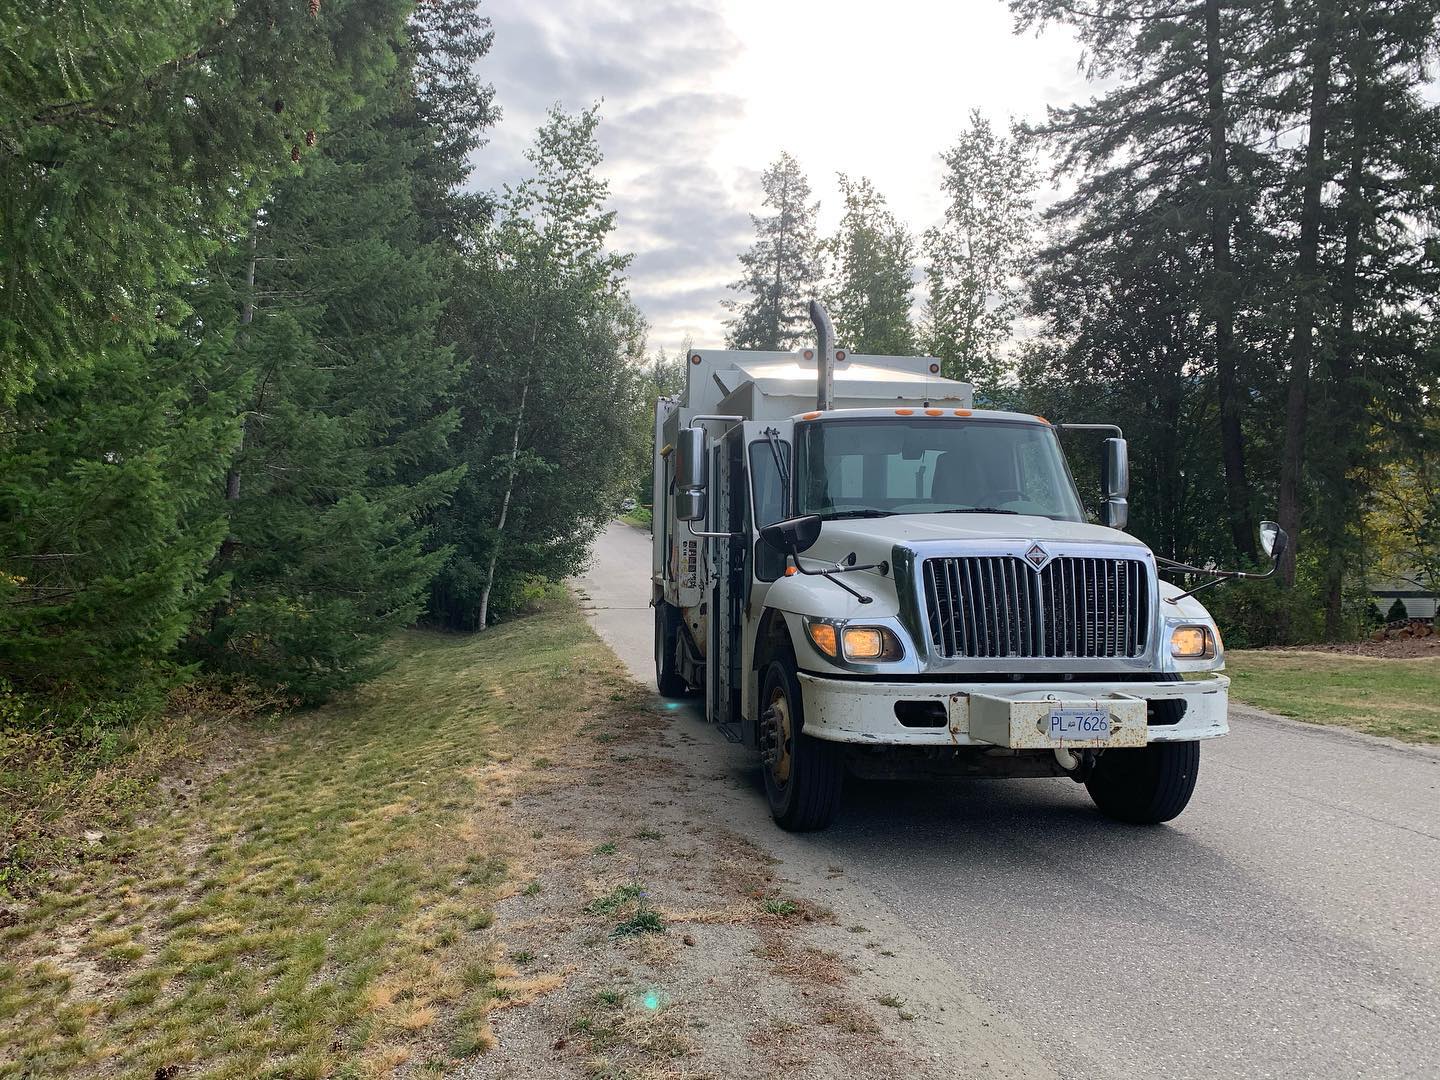 Shuswap Enviro Solutions: We take your garbage seriously. Shuswap Enviro Solutions is 100% locally owned and family operated! We specialize in weekly residential waste and recycling collection, bulk waste removal, and commercial roll […]